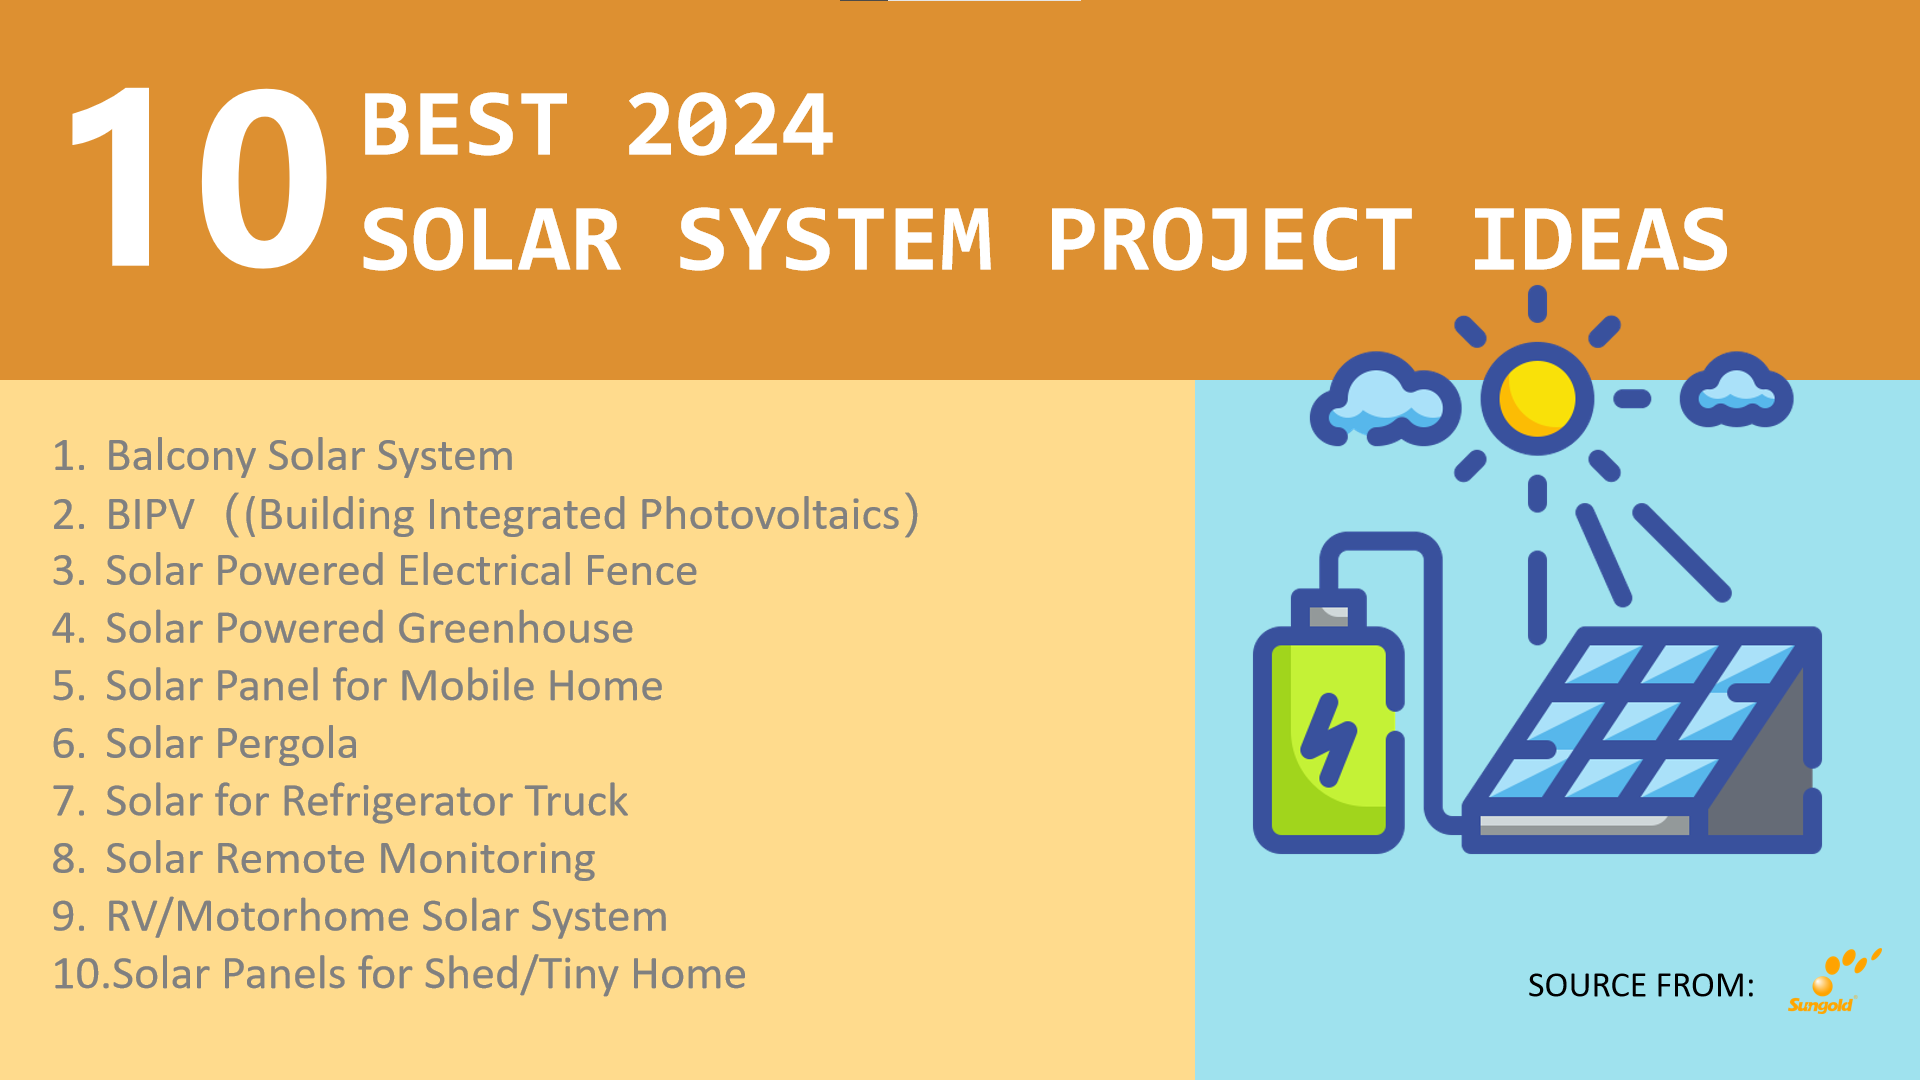 10 Best Solar System Project Ideas 2024